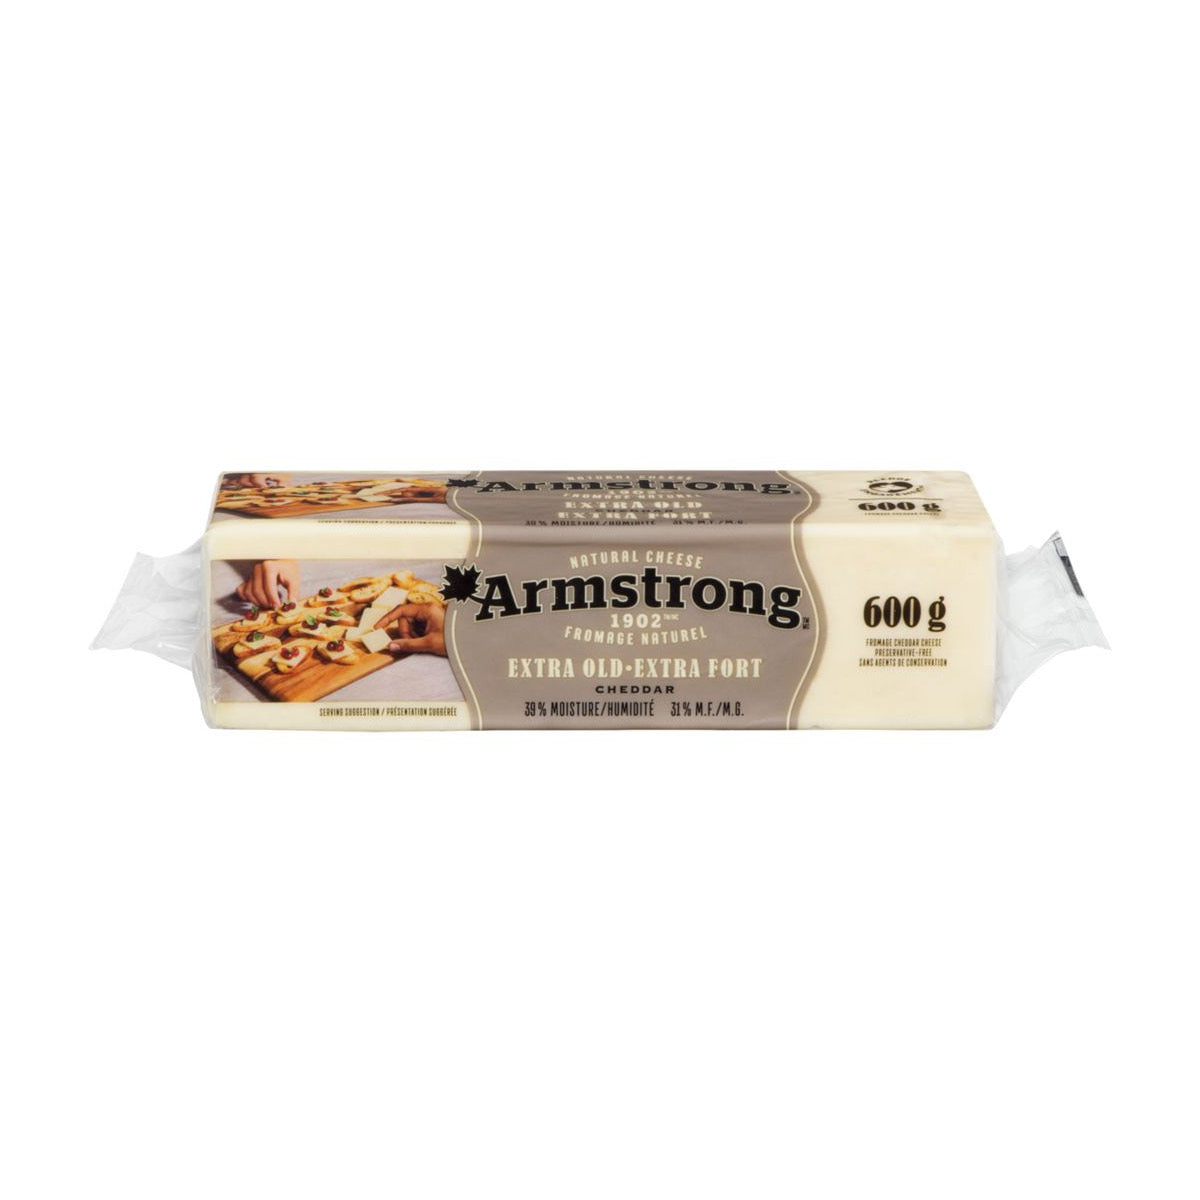 Armstrong Extra Old White Cheddar, 600g